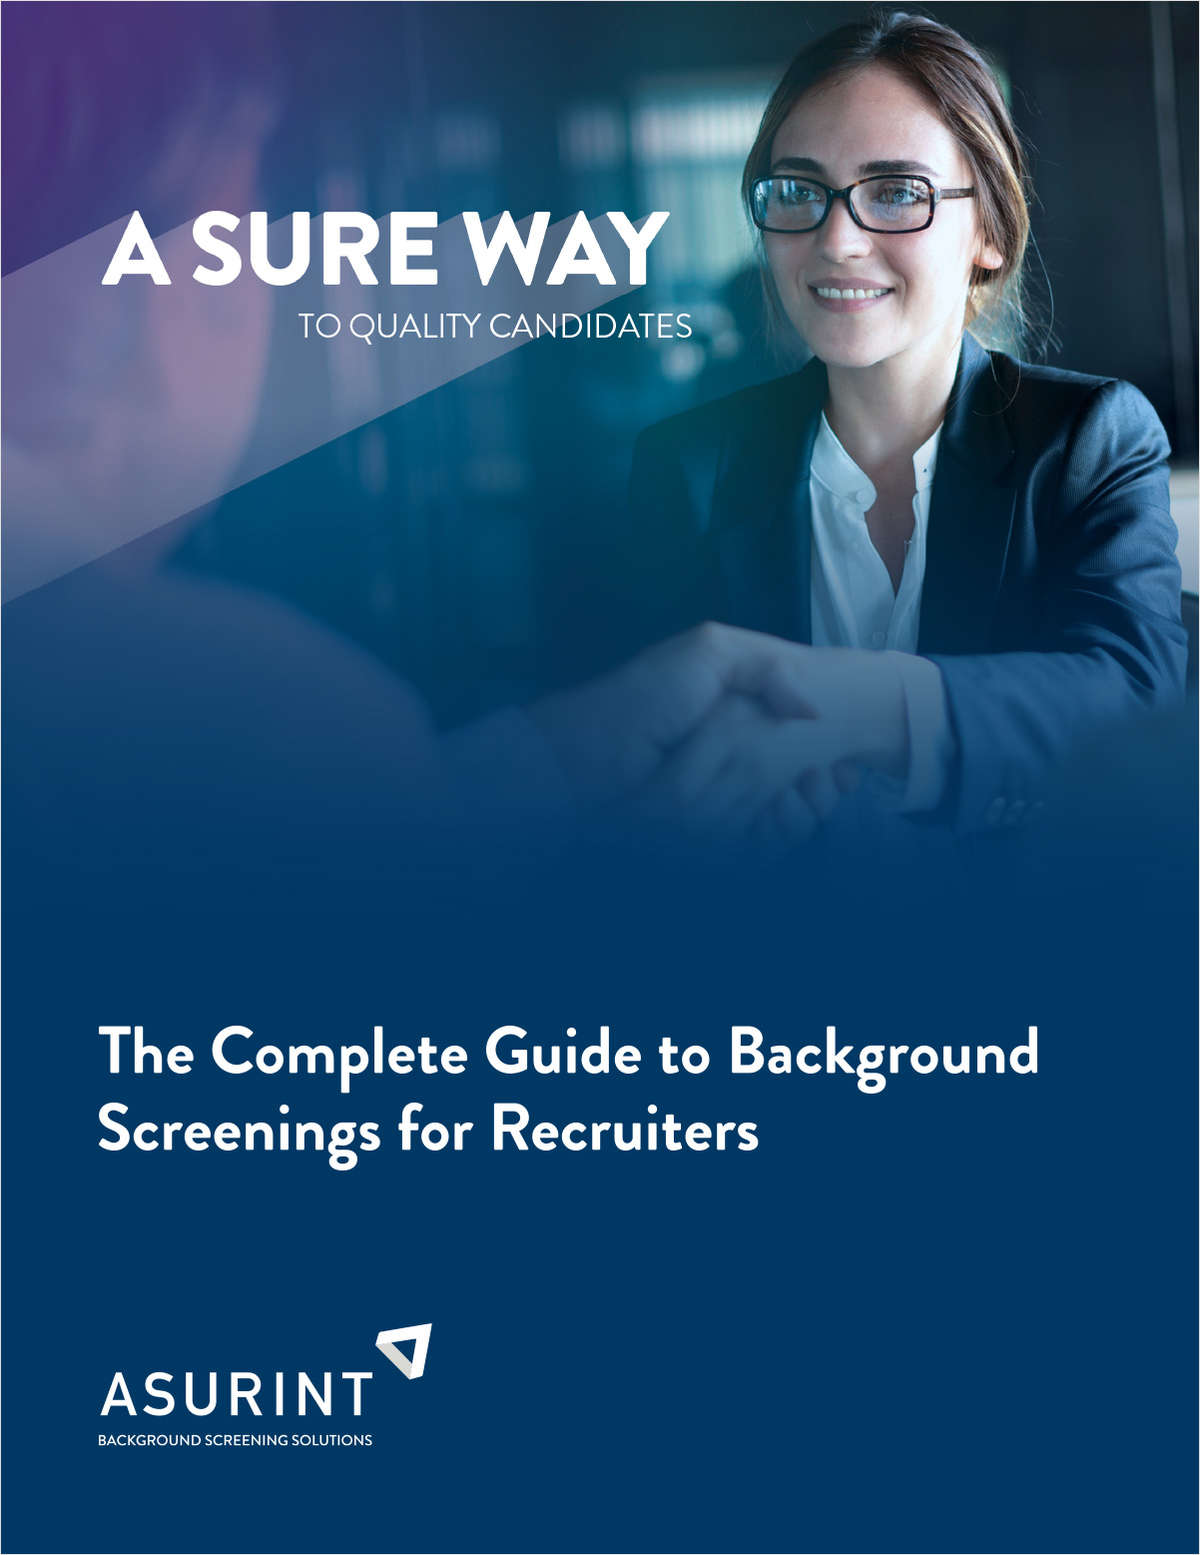 Complete Guide to Background Screenings for Recruiters